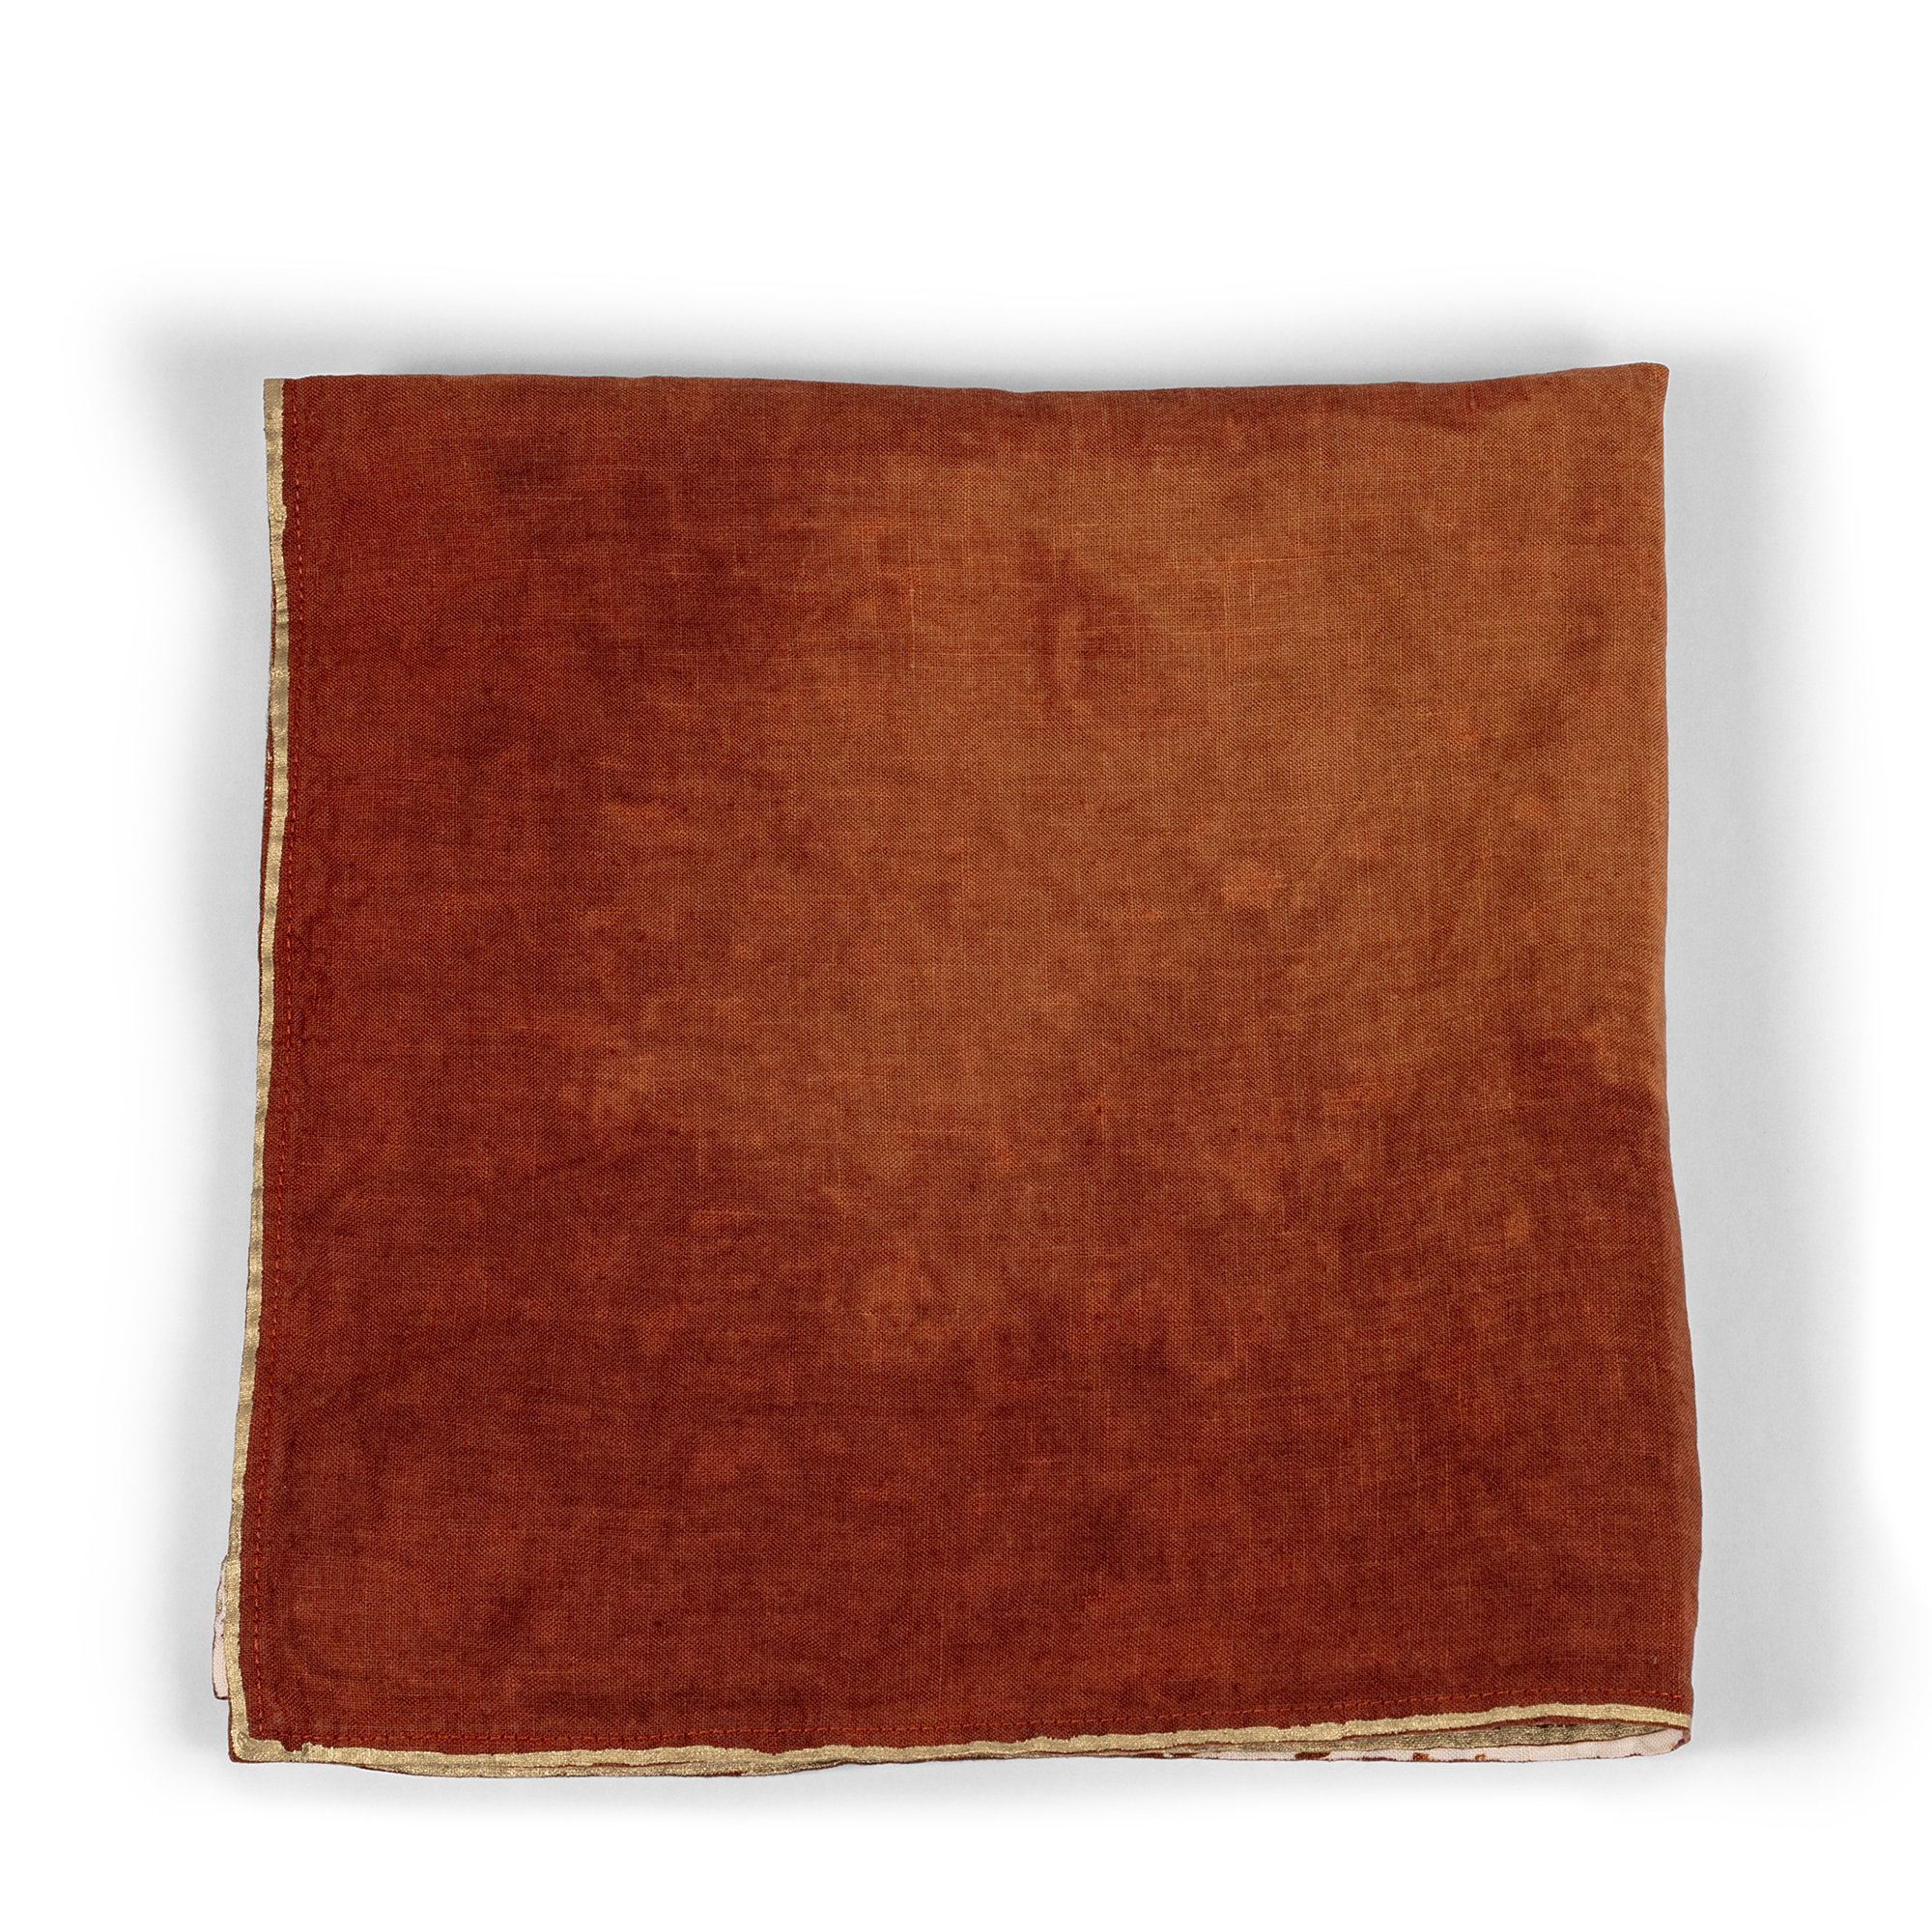 A luxurious burnt orange linen napkin with a gold-dipped edge, perfect for adding a touch of elegance and warmth to any table setting.